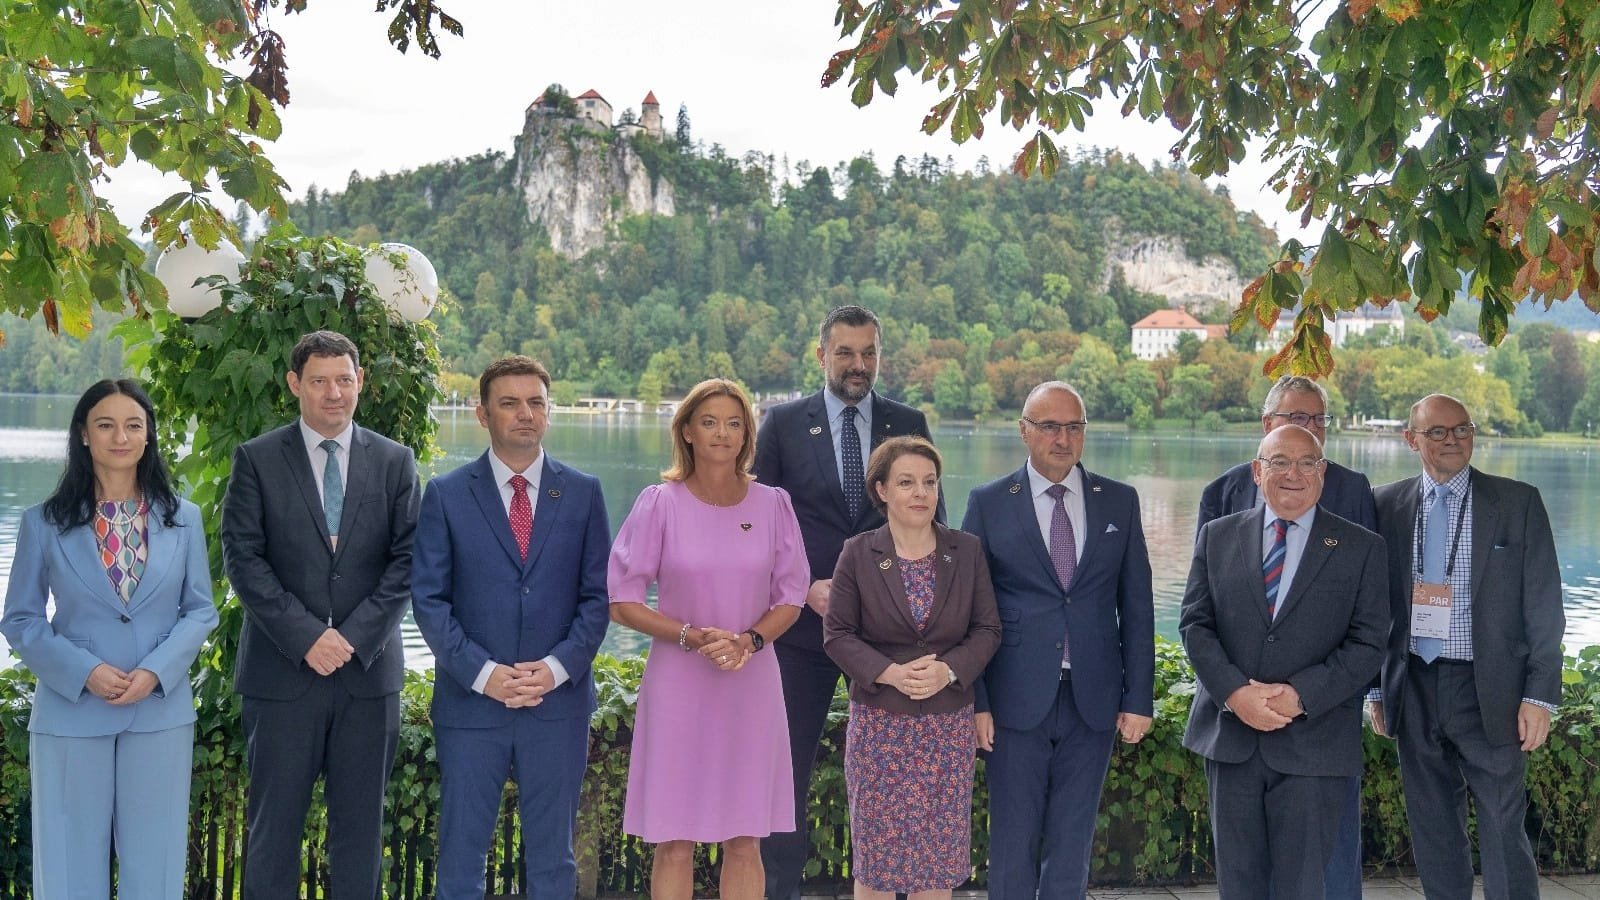 Ministers of the region and Europe come together in the working morning